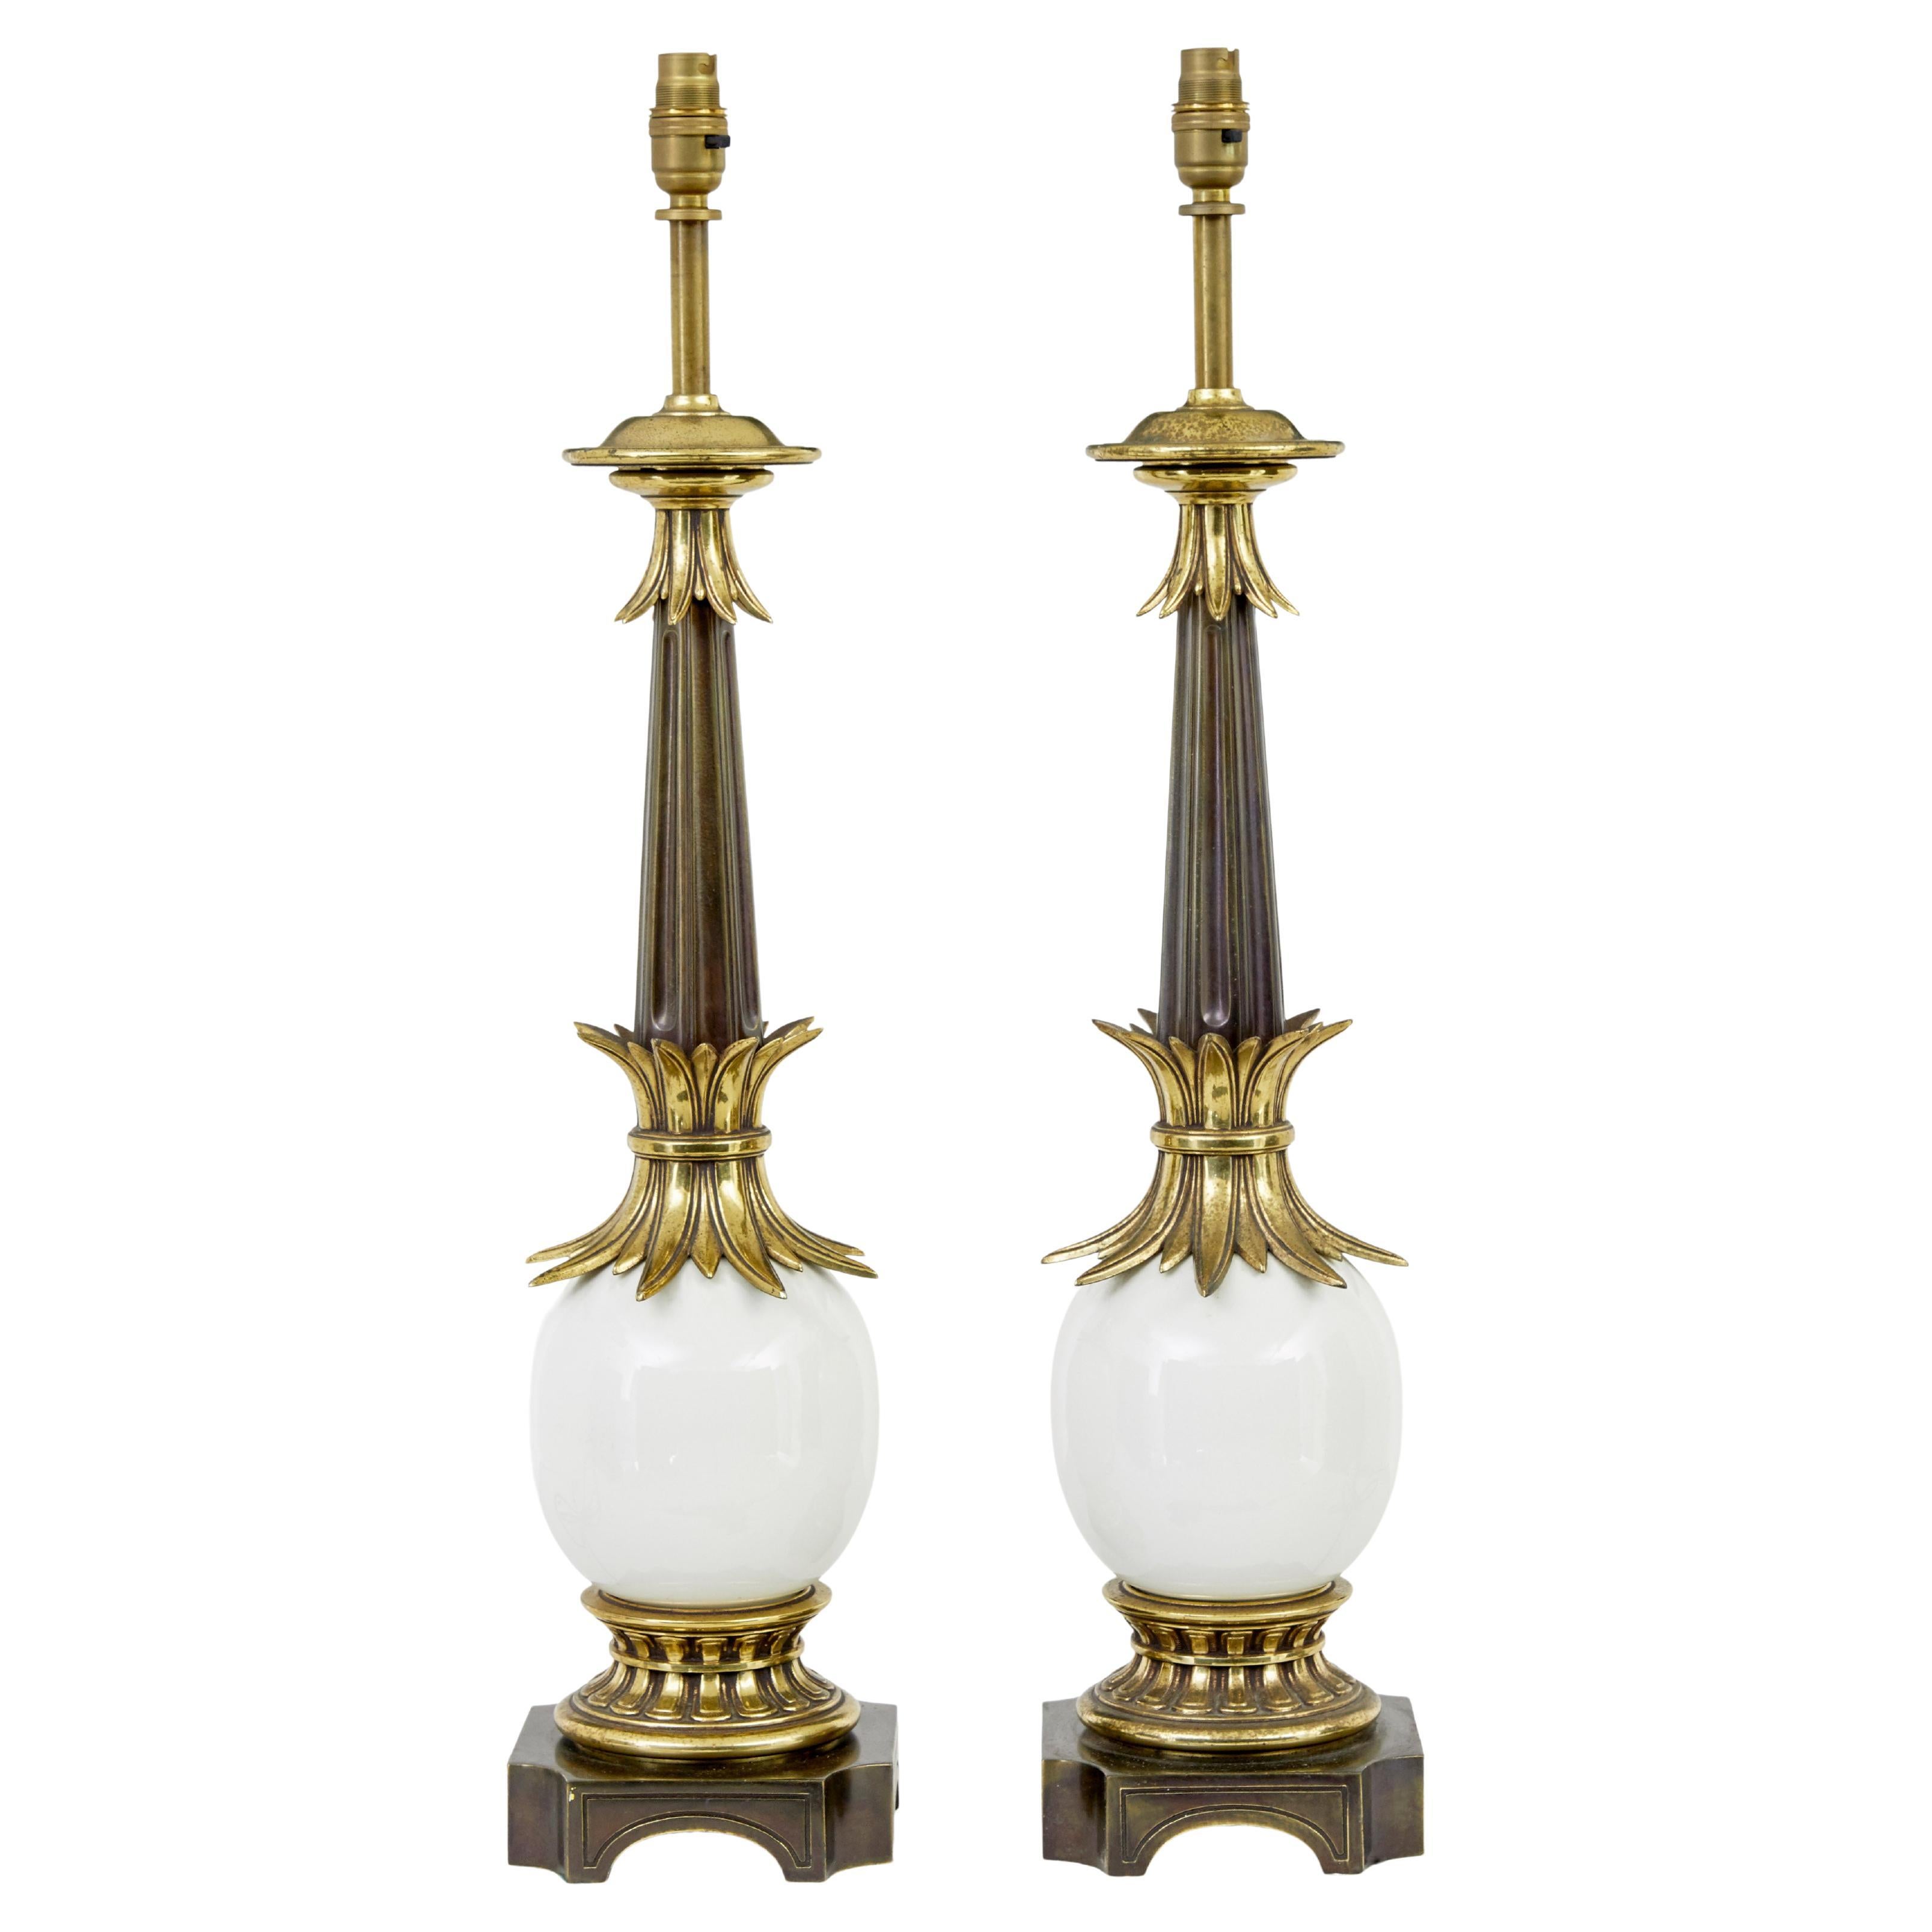 Pair of art deco influenced brass and glass table lamps